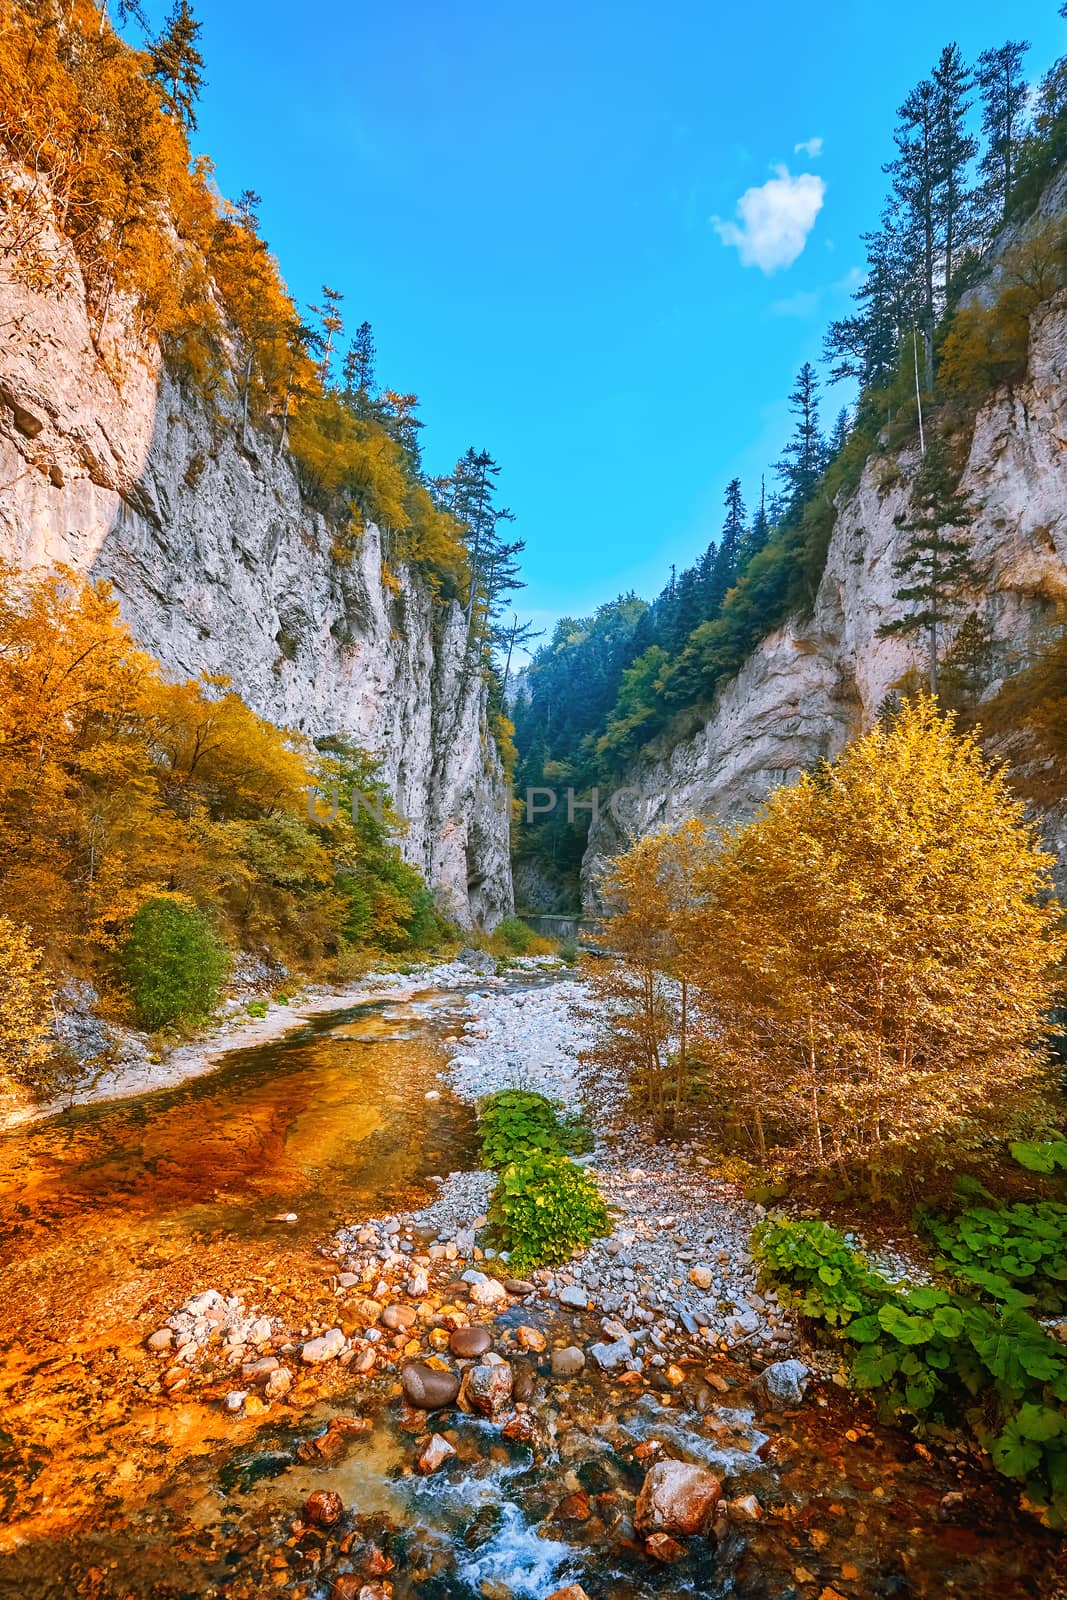 The Devin River Valley in the Western Rhodopes